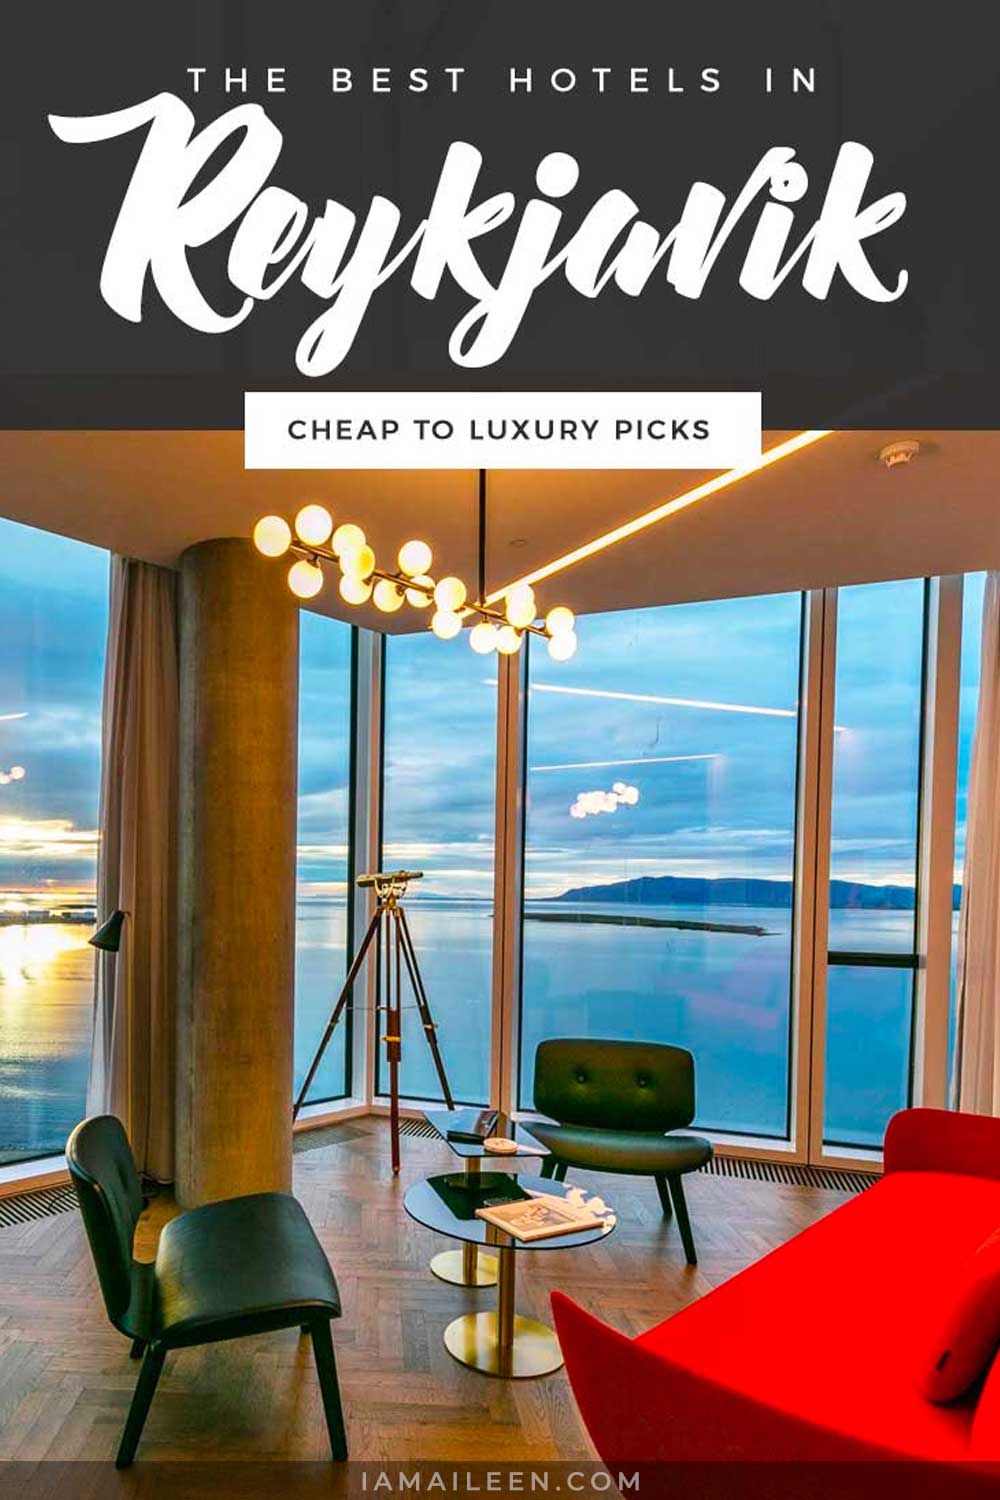 Best Hotels in Reykjavik, Iceland: Cheap to Luxury Accommodations